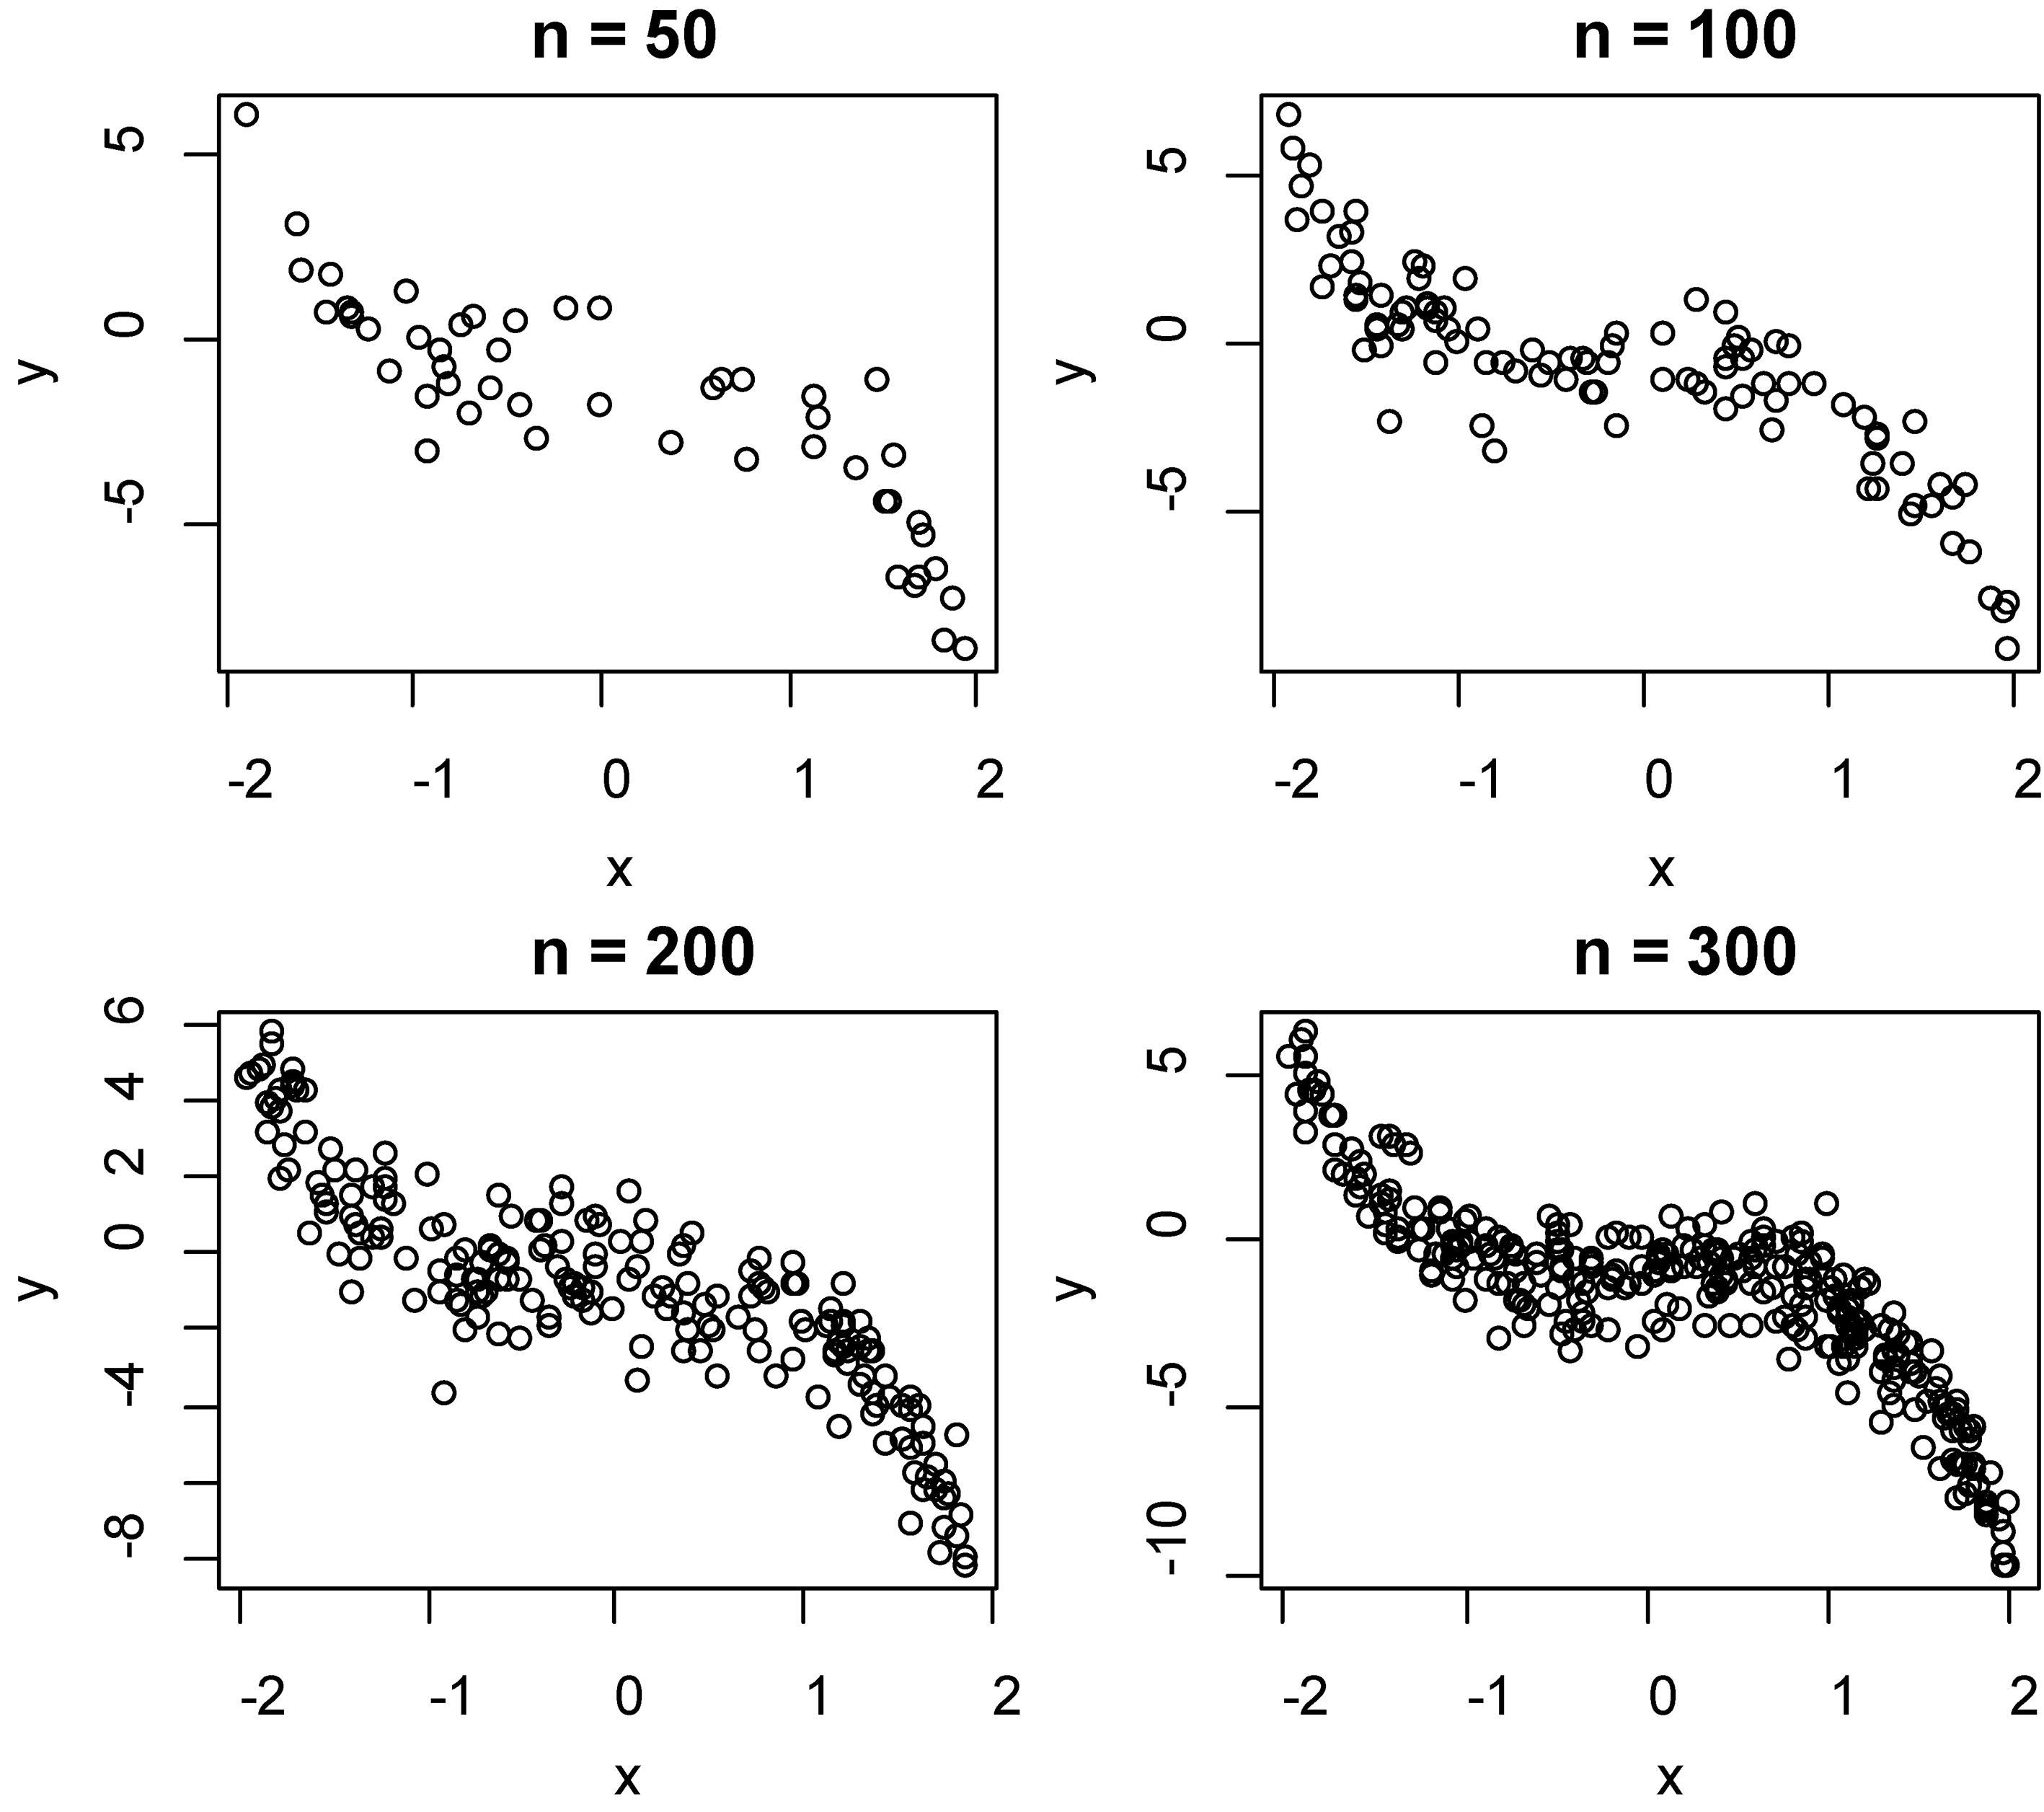 The scatter plot of dependent and independent variables on model 2.